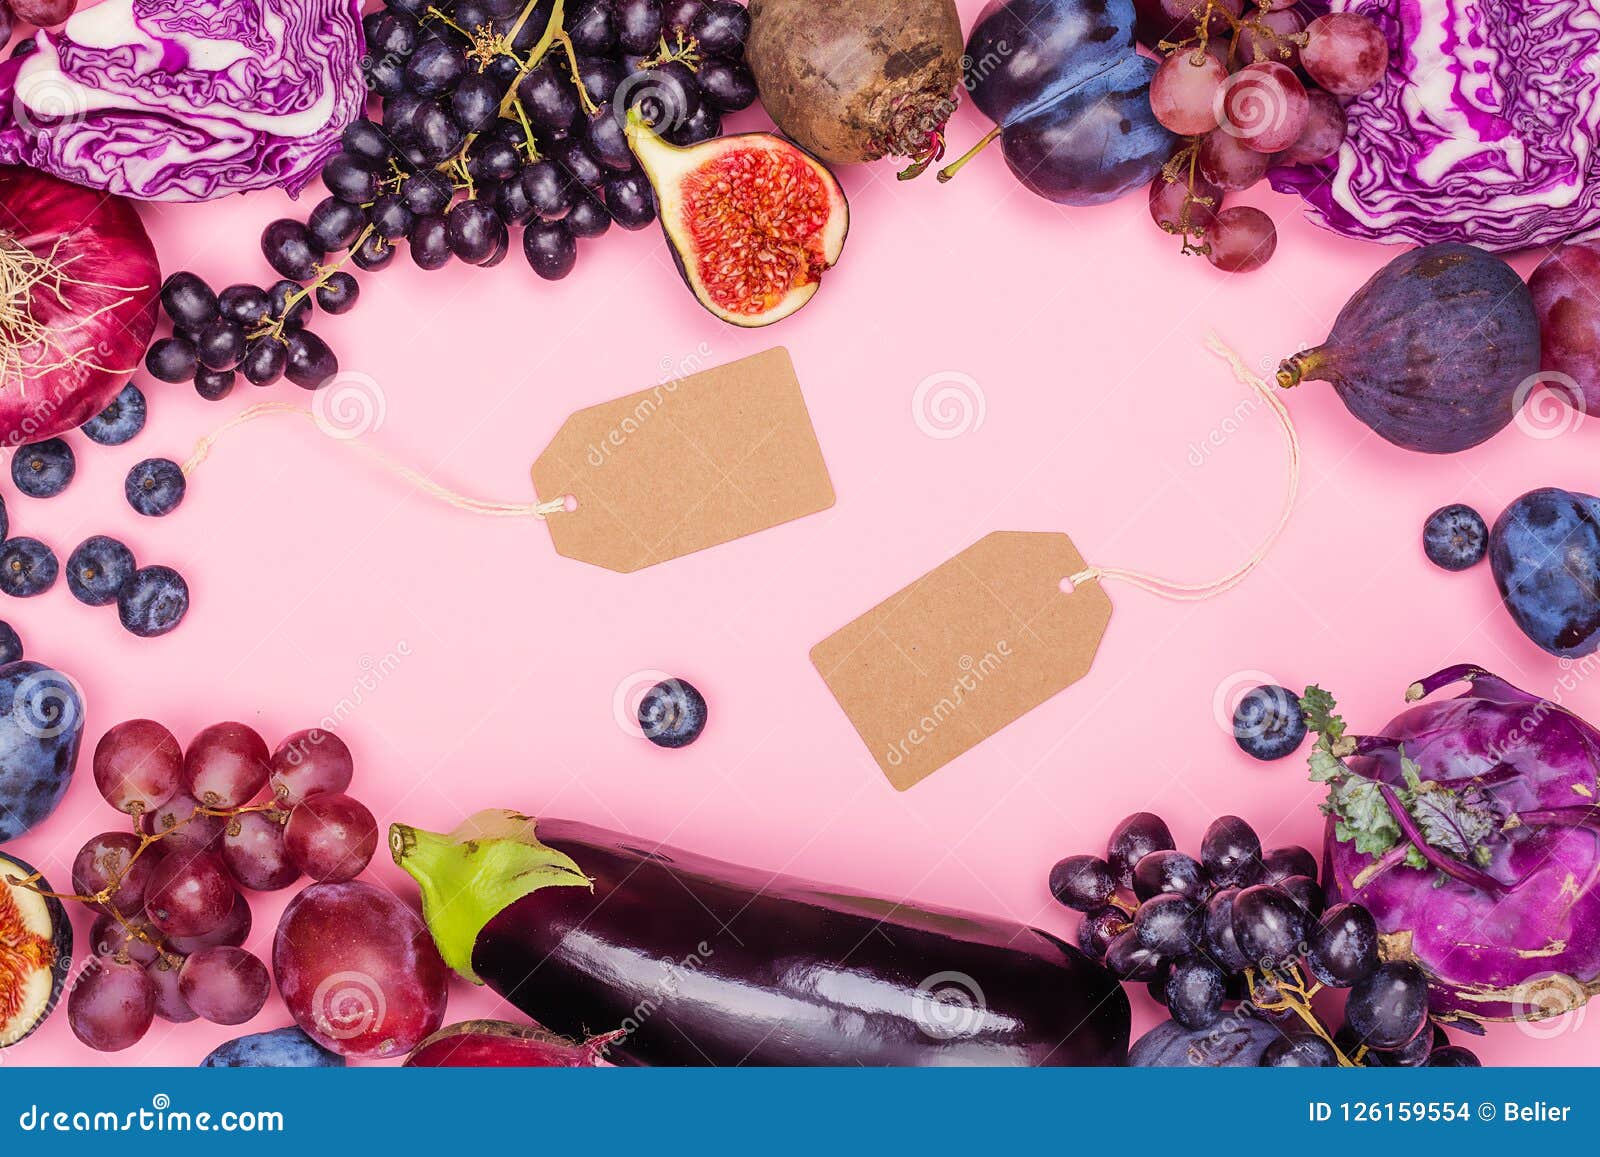 Selection of purple foods stock photo Image of fruits 